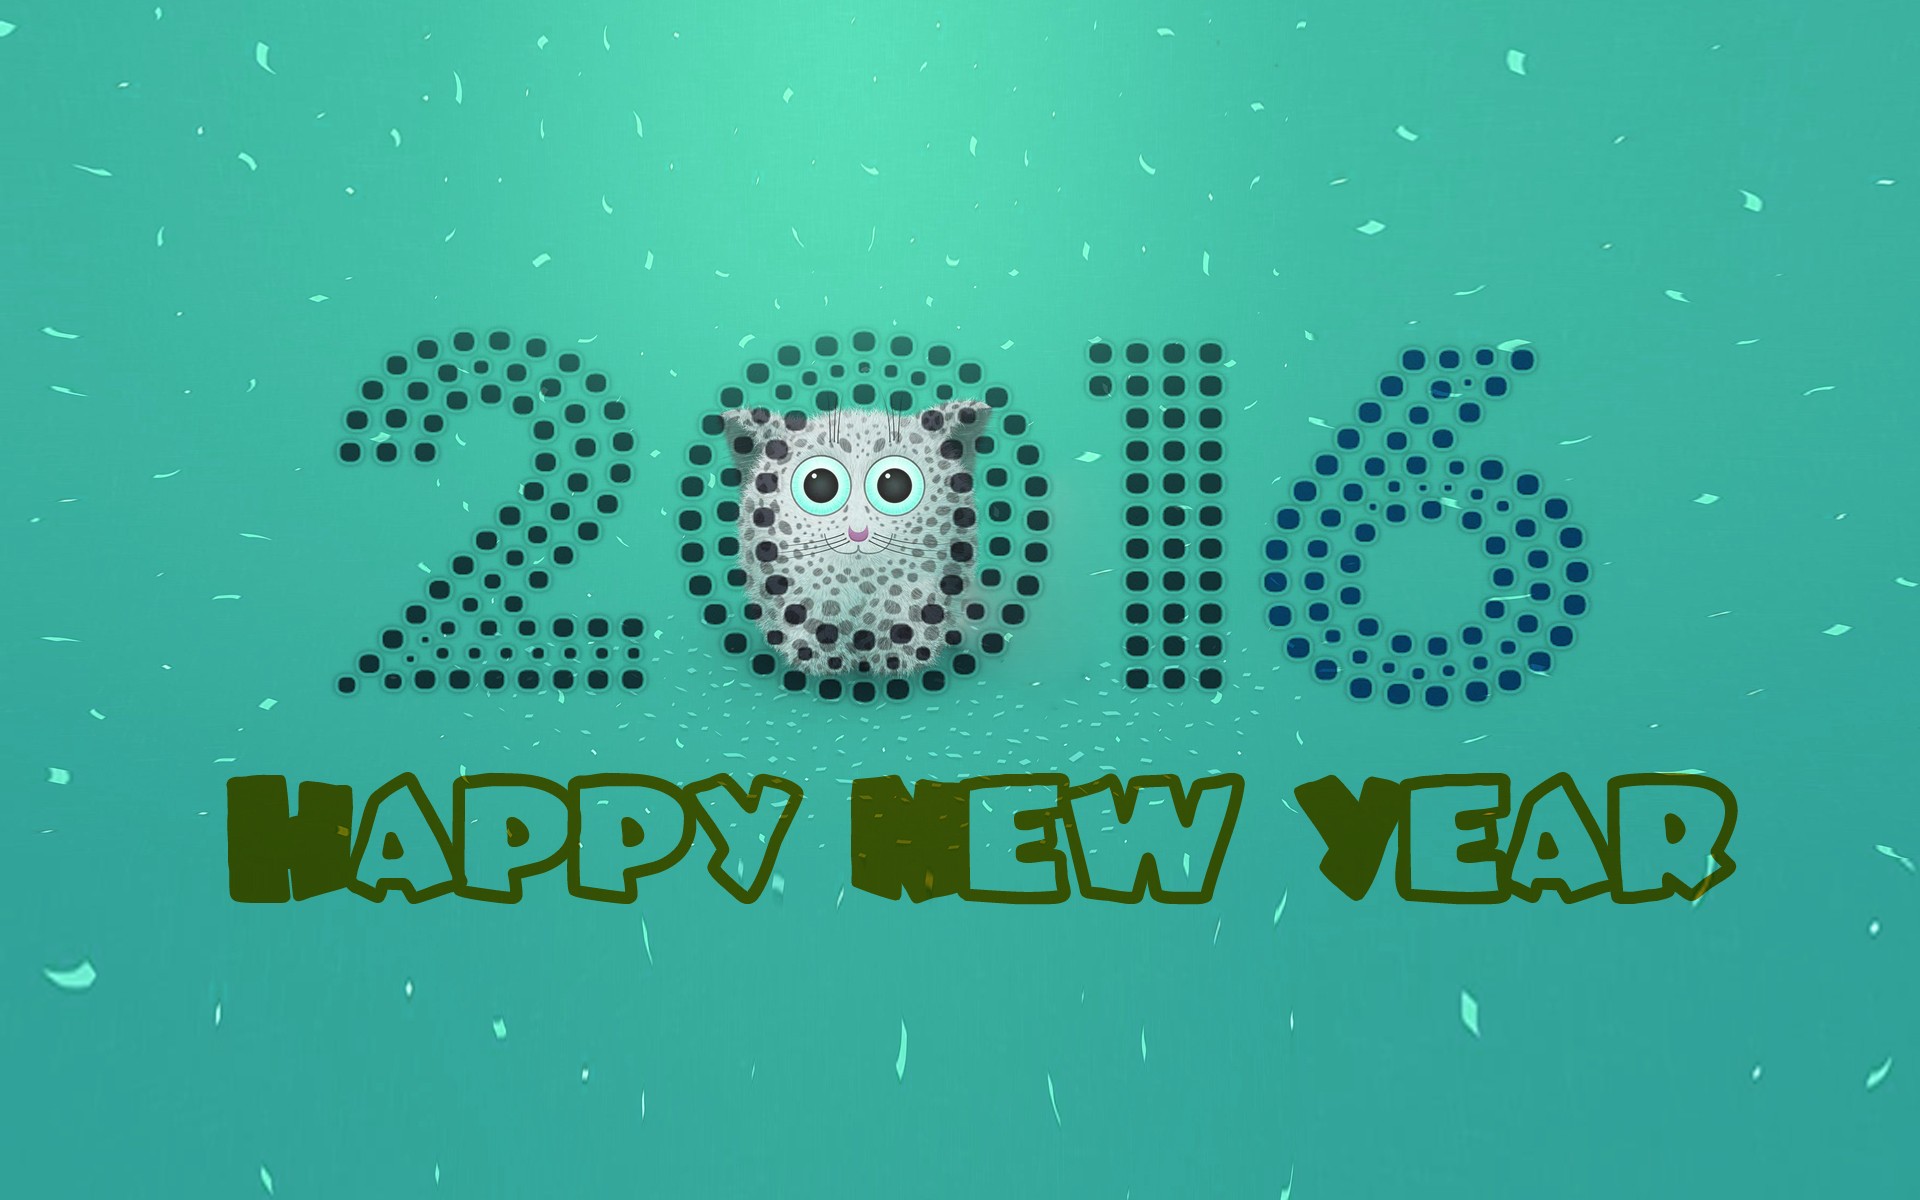 Beautiful Happy New Year Wallpapers Hd - Graphic Design - HD Wallpaper 